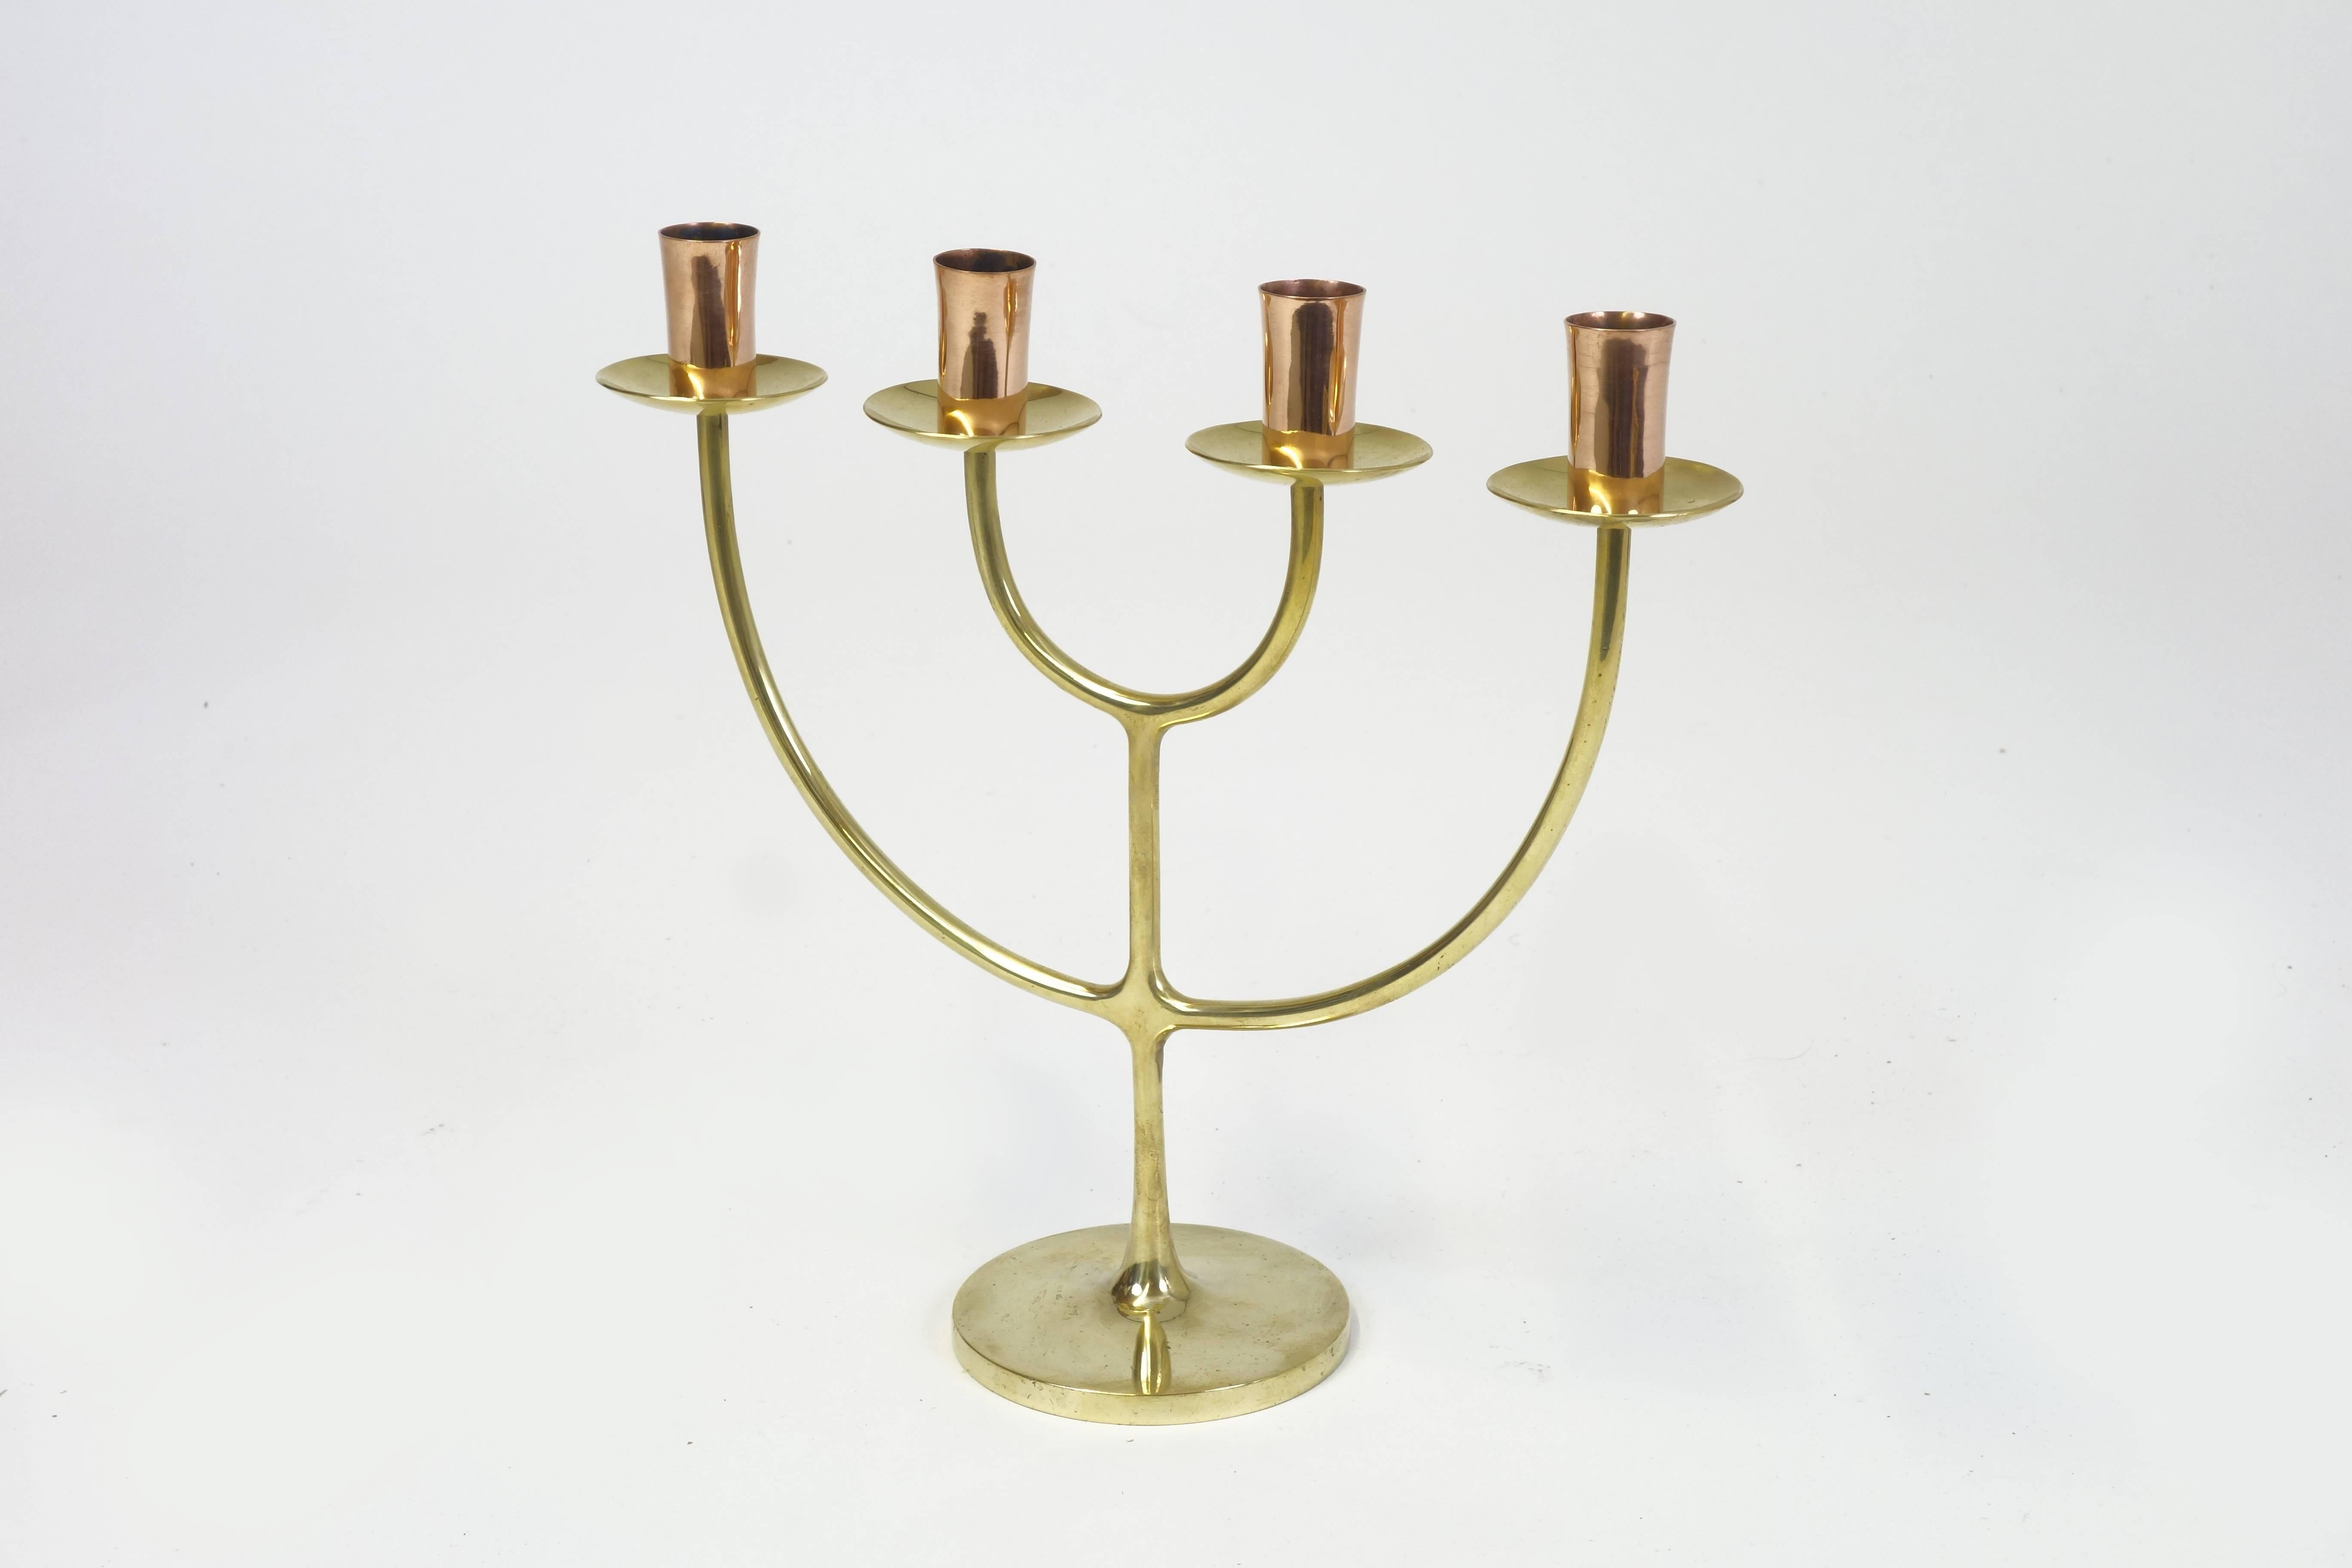 Candleholder for four candles manufactured in brass and copper by Karl Hagenauer, Vienna, 1950.